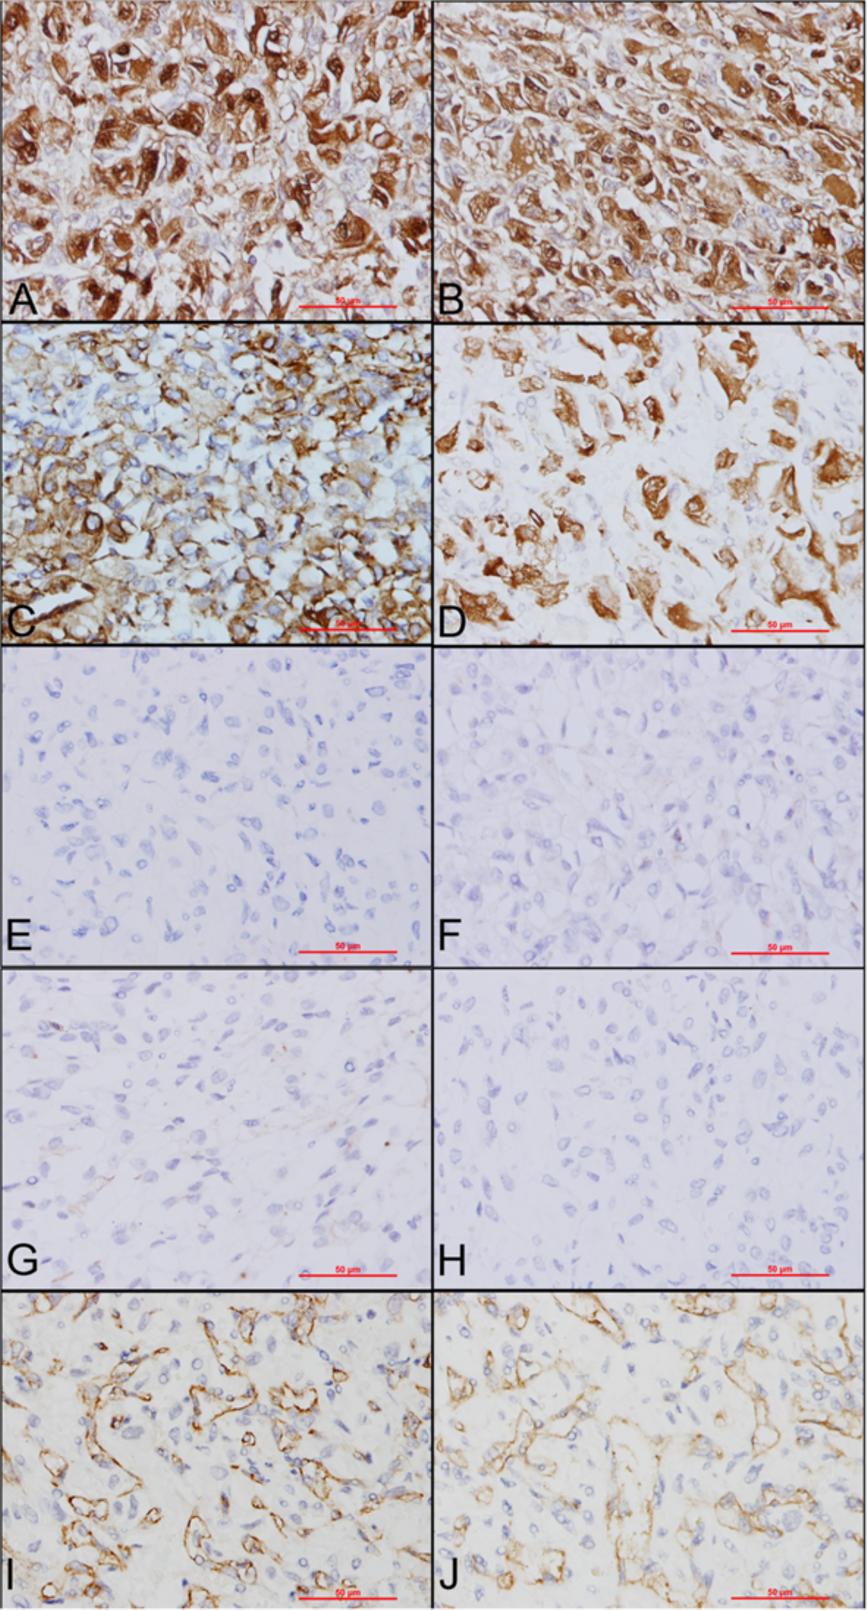 Liu et al. Diagnostic Pathology 2012, 7:49 Page 3 of 5 Figure 2 Immunohistochemical staining. A: Positive staining for NSE. B: Positive staining for S100 protein. C: Positive staining for vimentin.